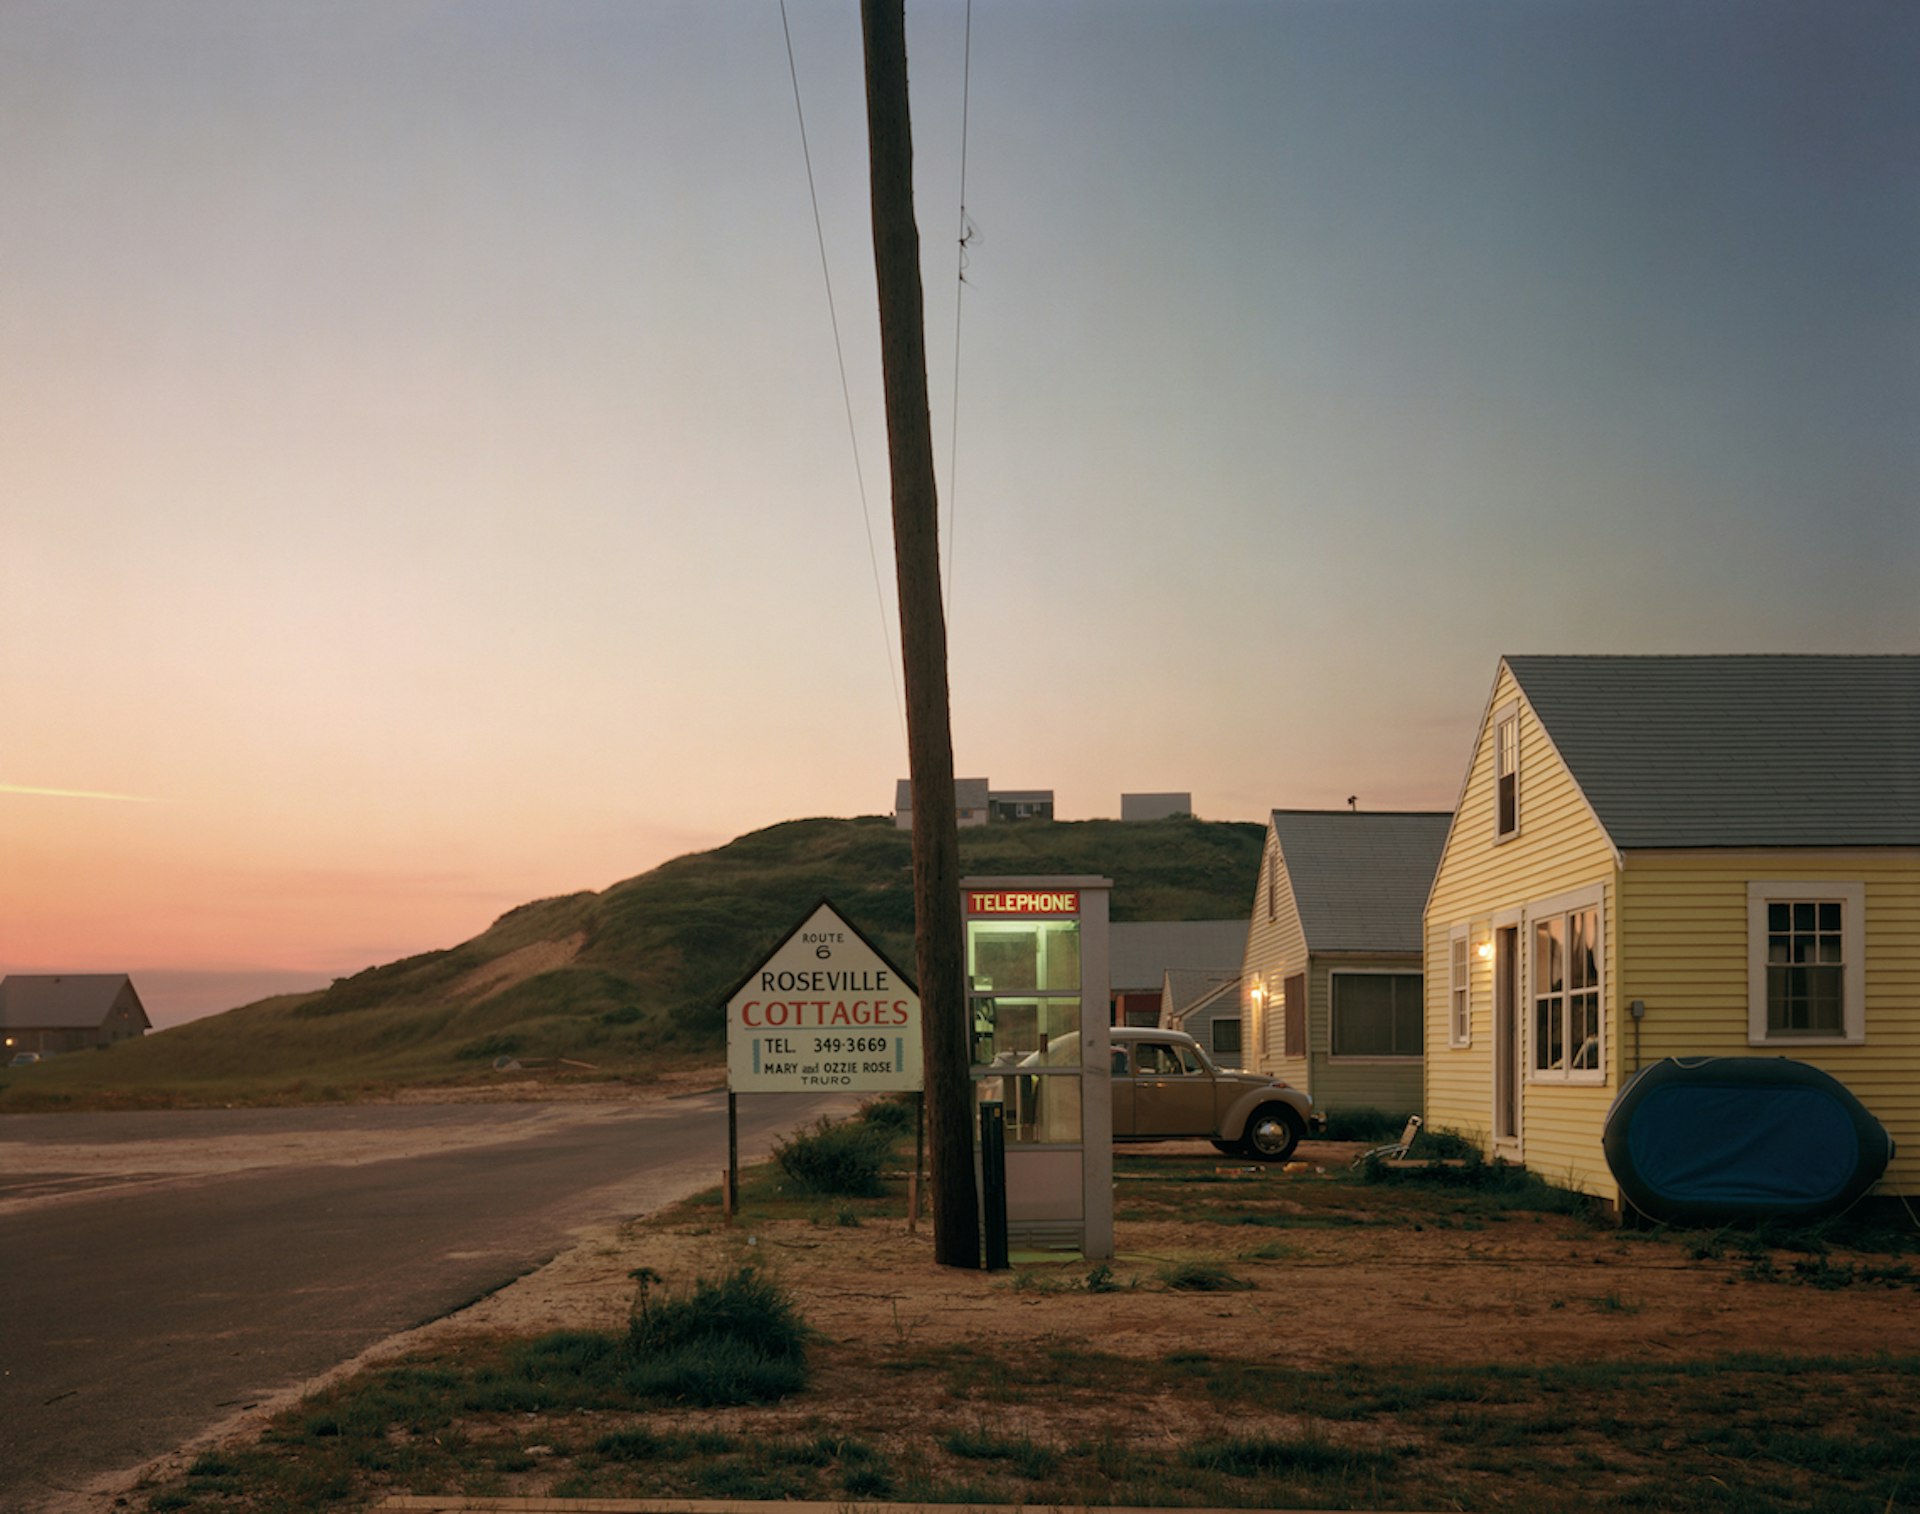 A photo exploration of the evolving American landscape